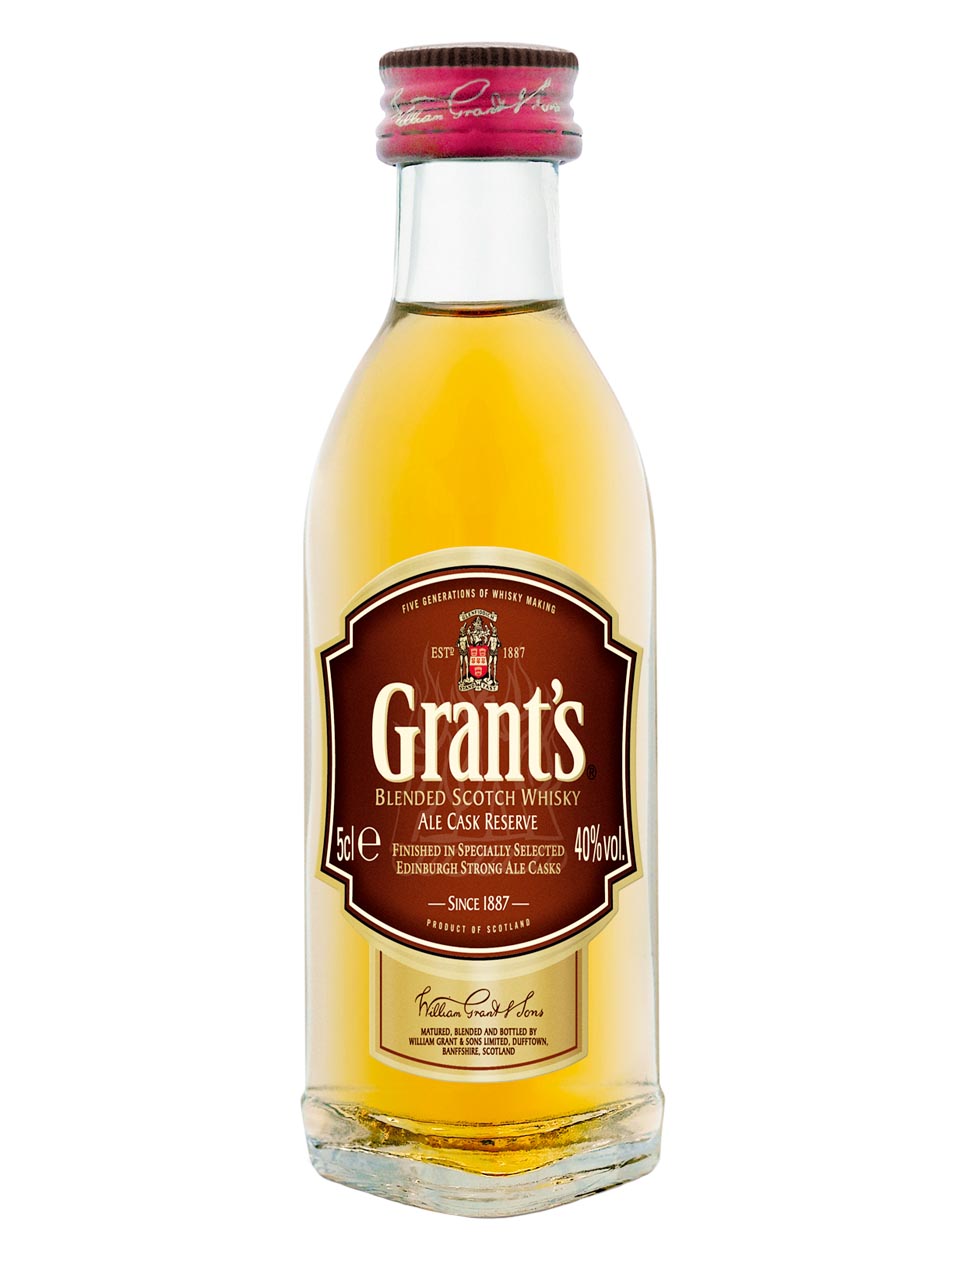 Grant's Triple Wood Blended Scotch Whisky 43% 0.05L PET null - onesize - 1